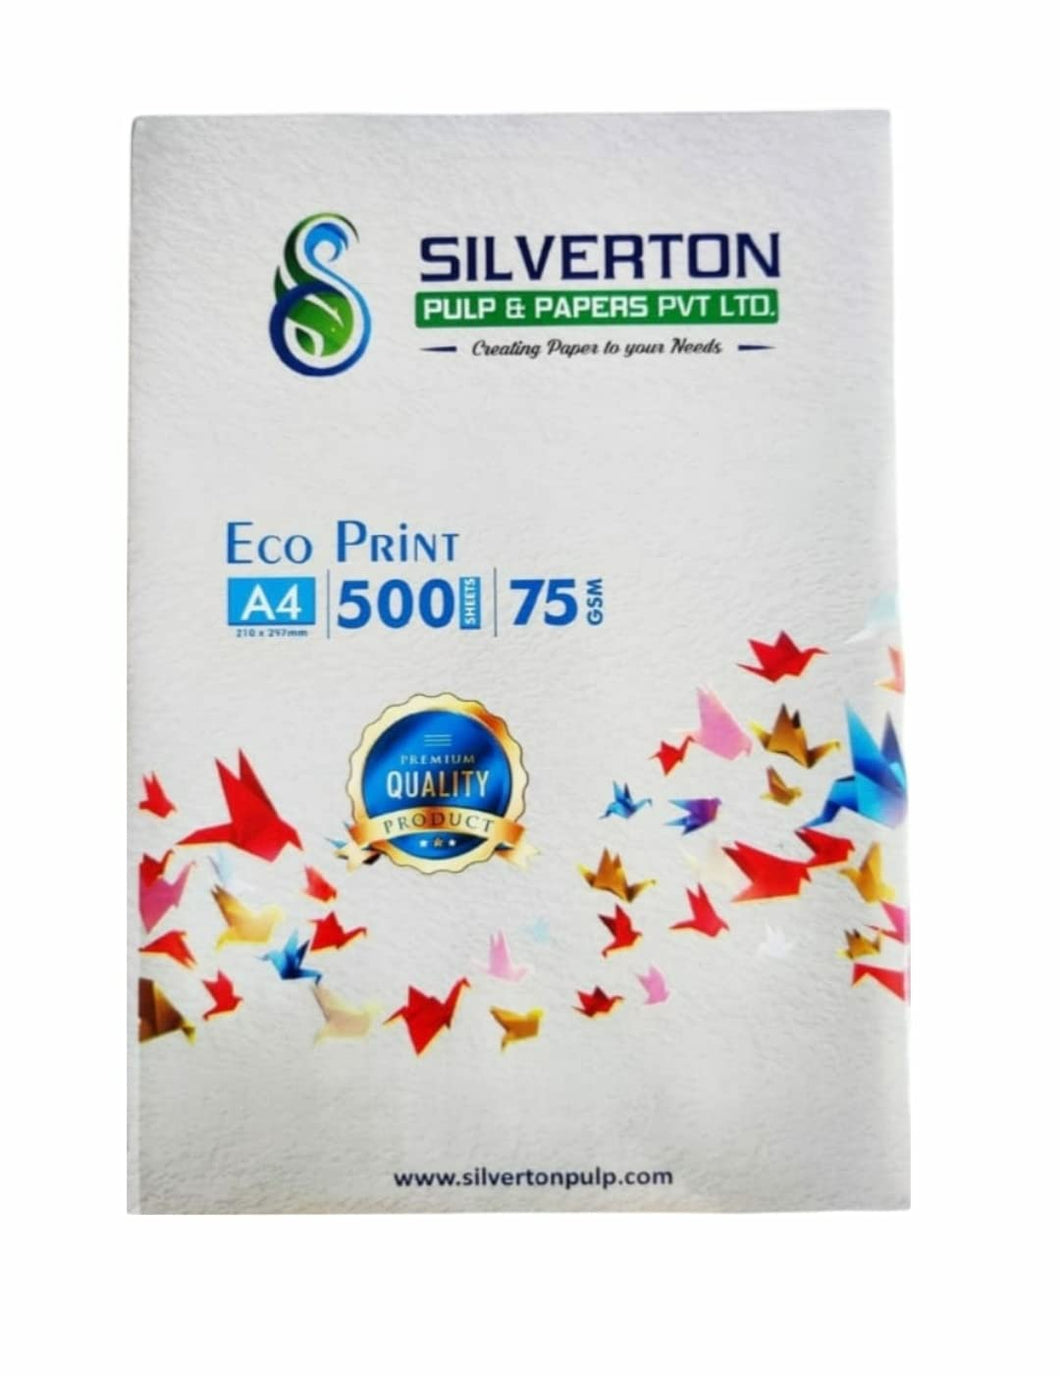 SILVERTON Eco Pure White Printing/Copier Paper- A4 Sheets, 75 GSM, 500 Sheets(1 Ream)